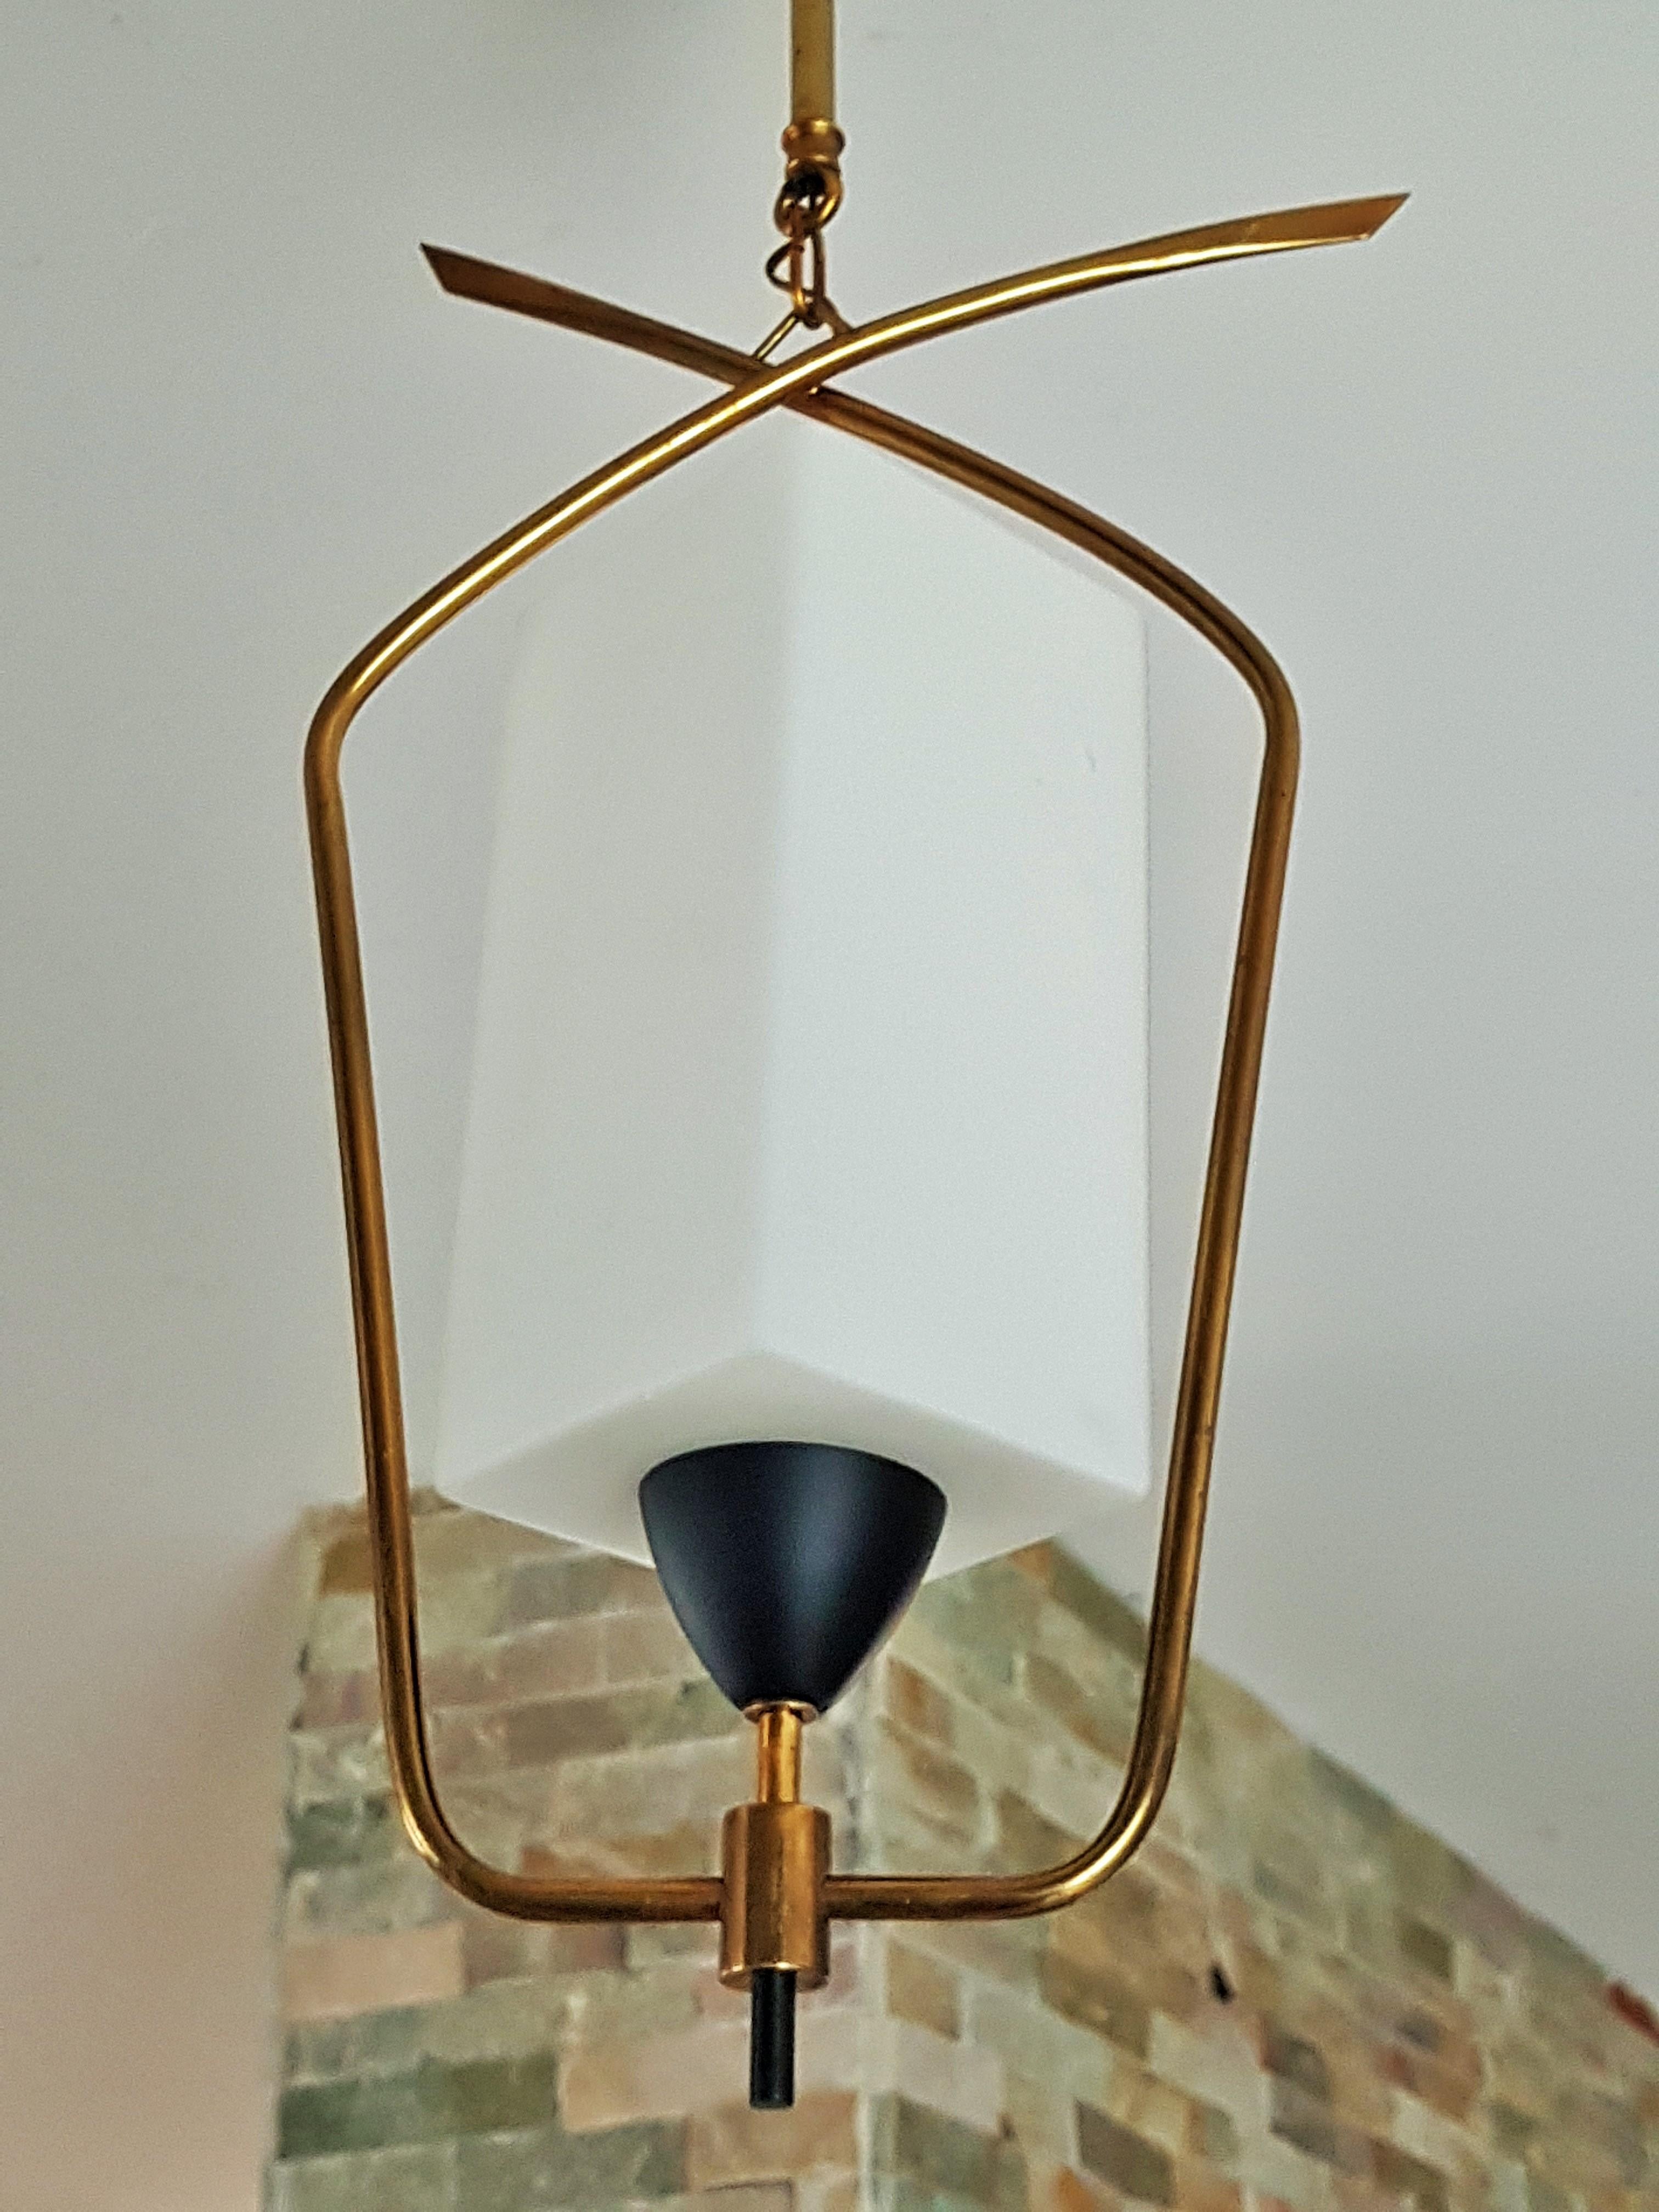 Midcentury Brass and Glass Pendant Lantern by Arlus Lunel, France, 1950 For Sale 7